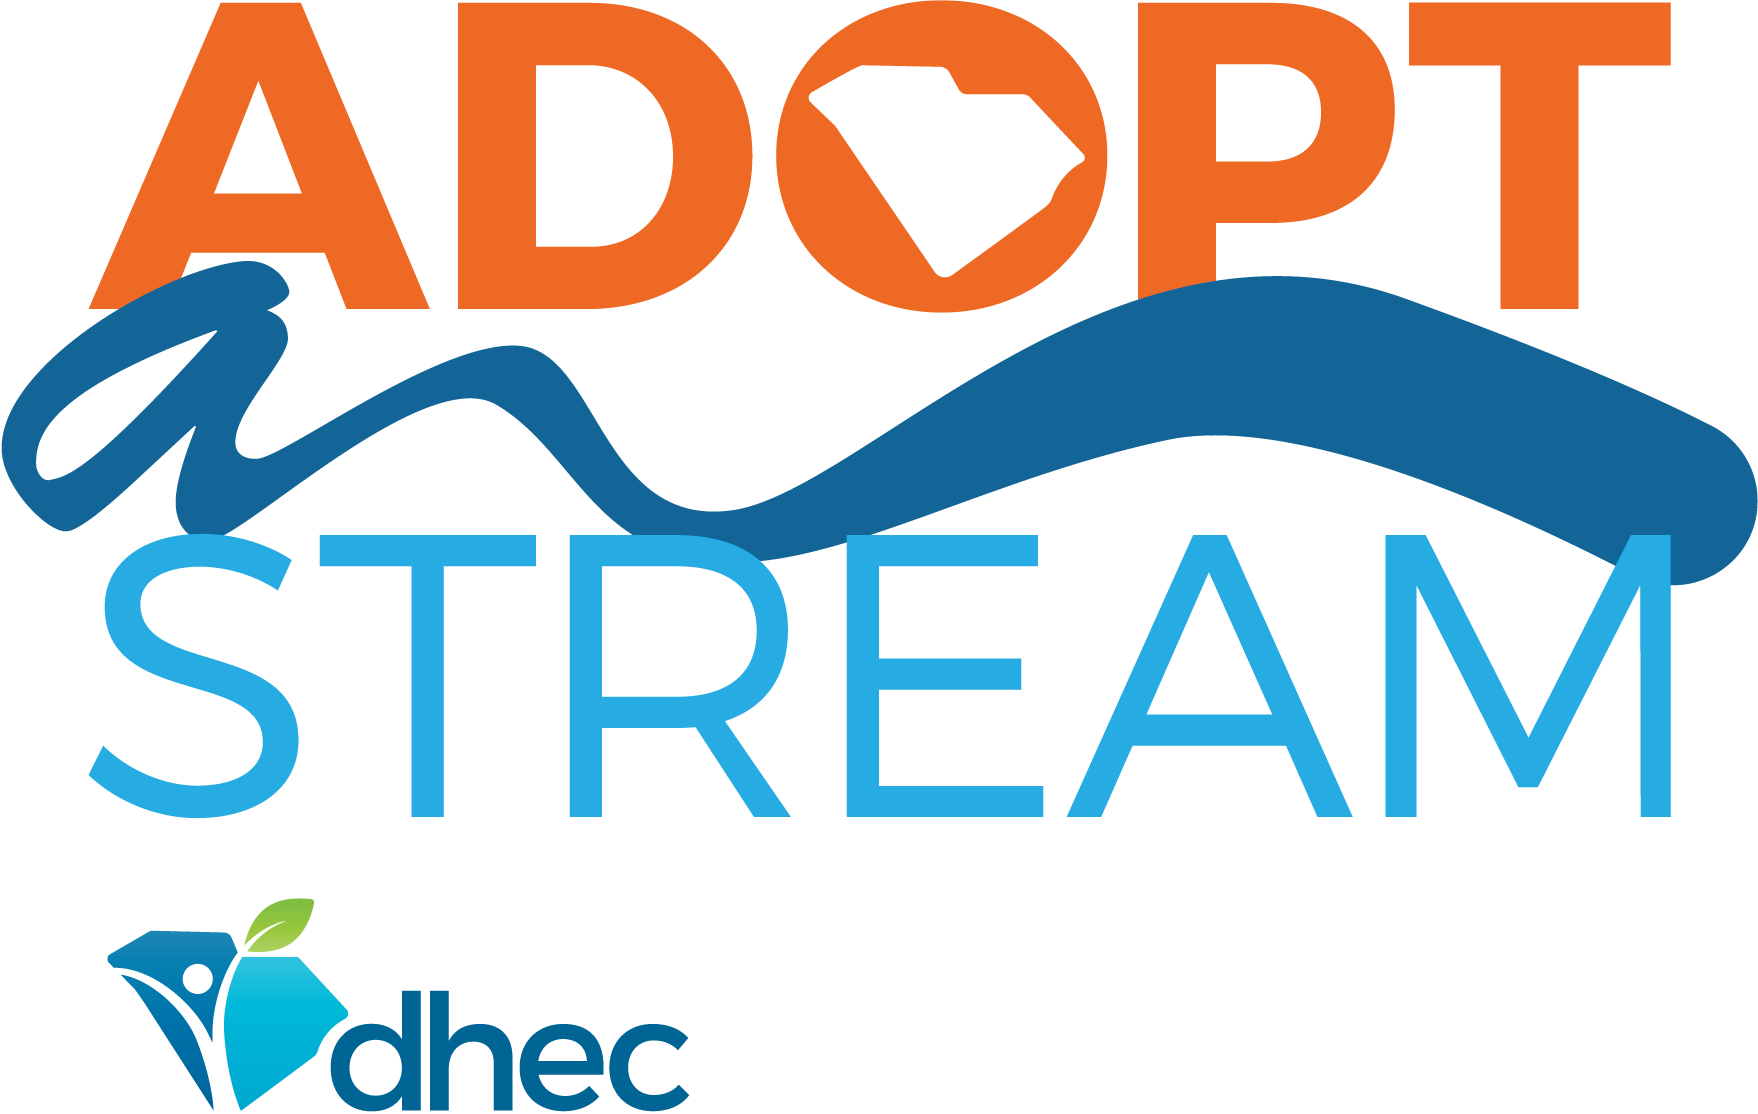 adopt a stream, dhec, and center for watershed excellence clemson logos